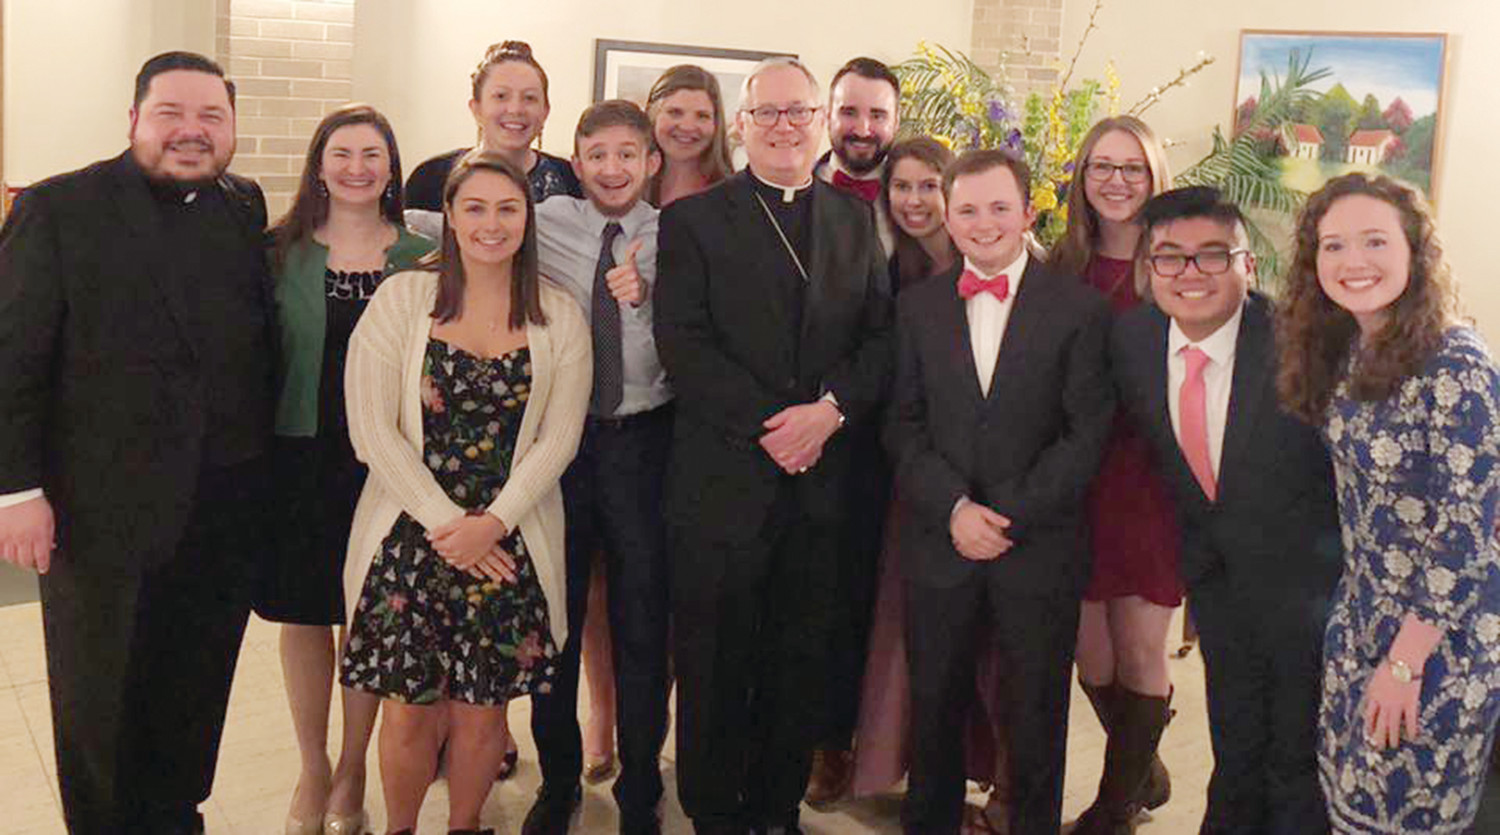 Bishop Tobin is pictured with the staff and student executive board of the Catholic Center, along with current URI chaplain Father Joseph Upton, at left.